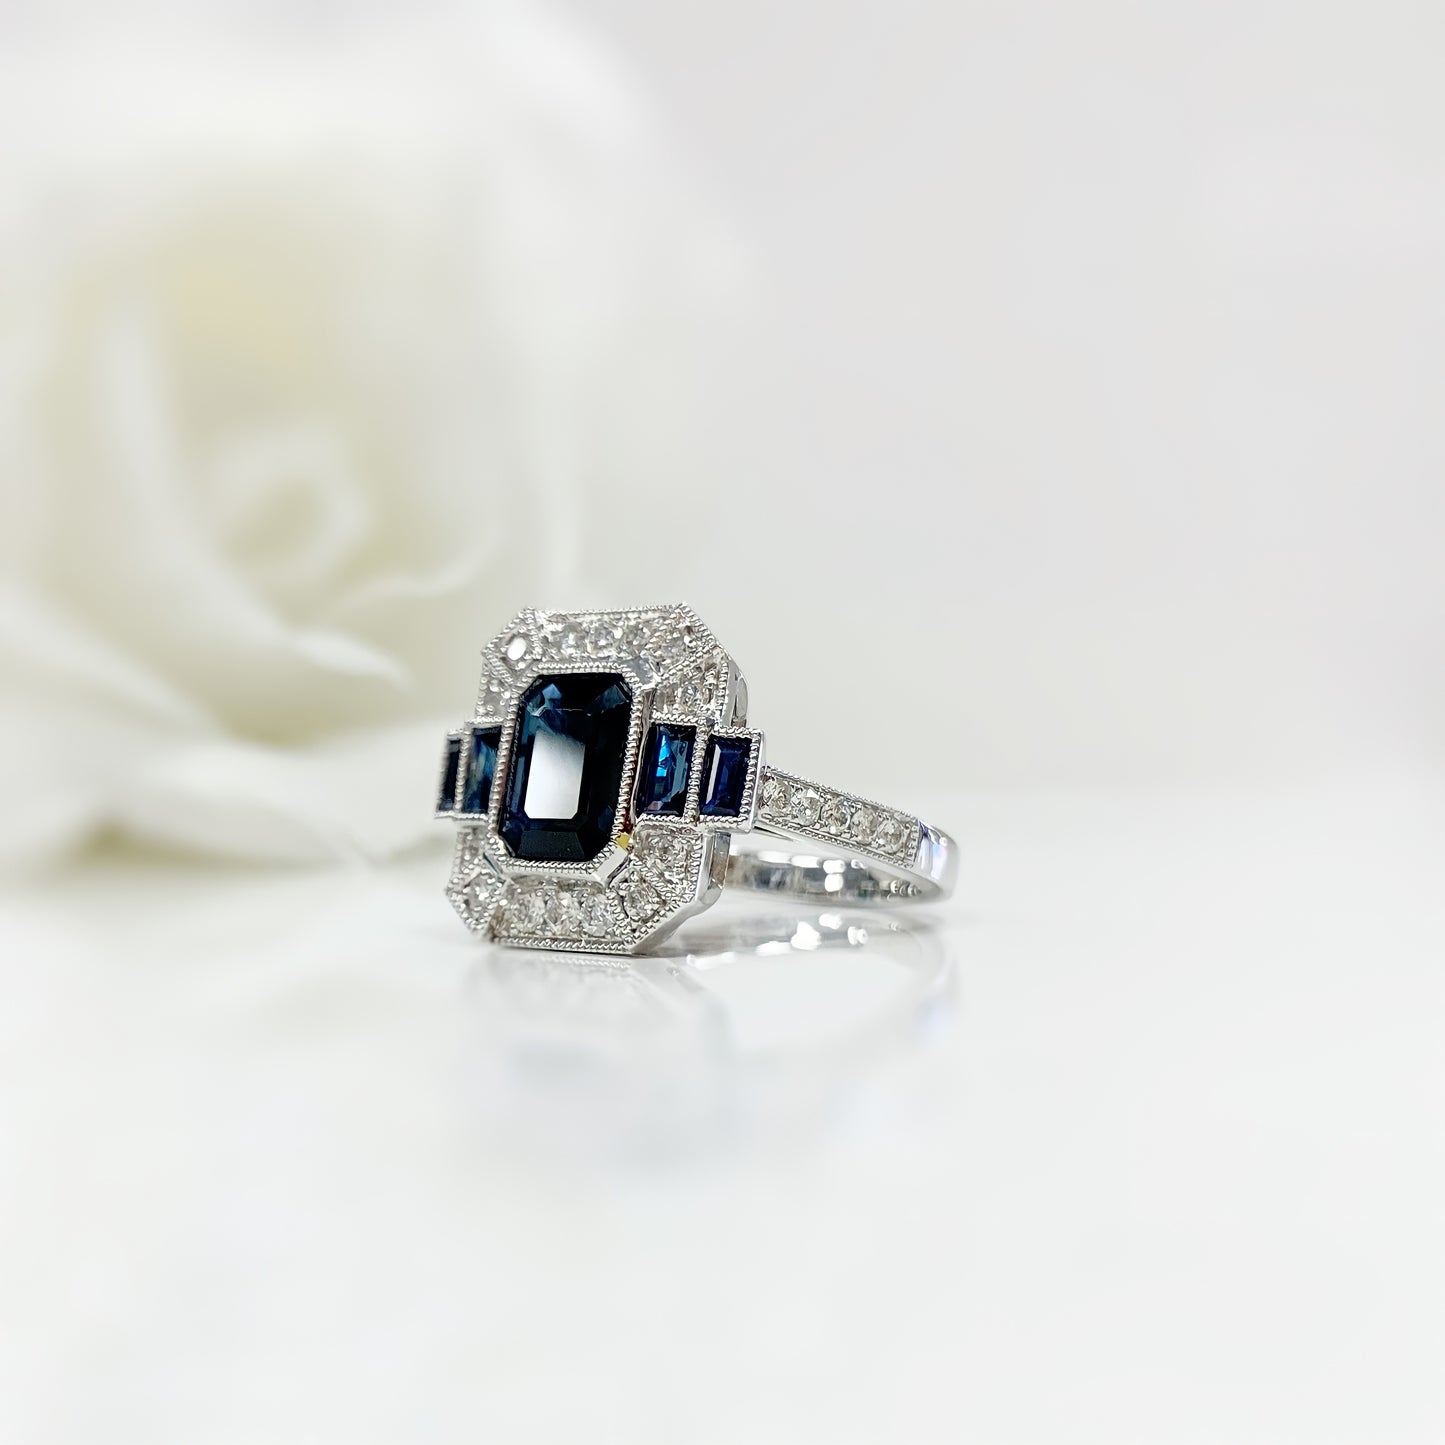 Art Deco Reproduction Magnificent 18ct White Gold Sapphire and Diamond Cocktail Ring - SIZE M 1/2